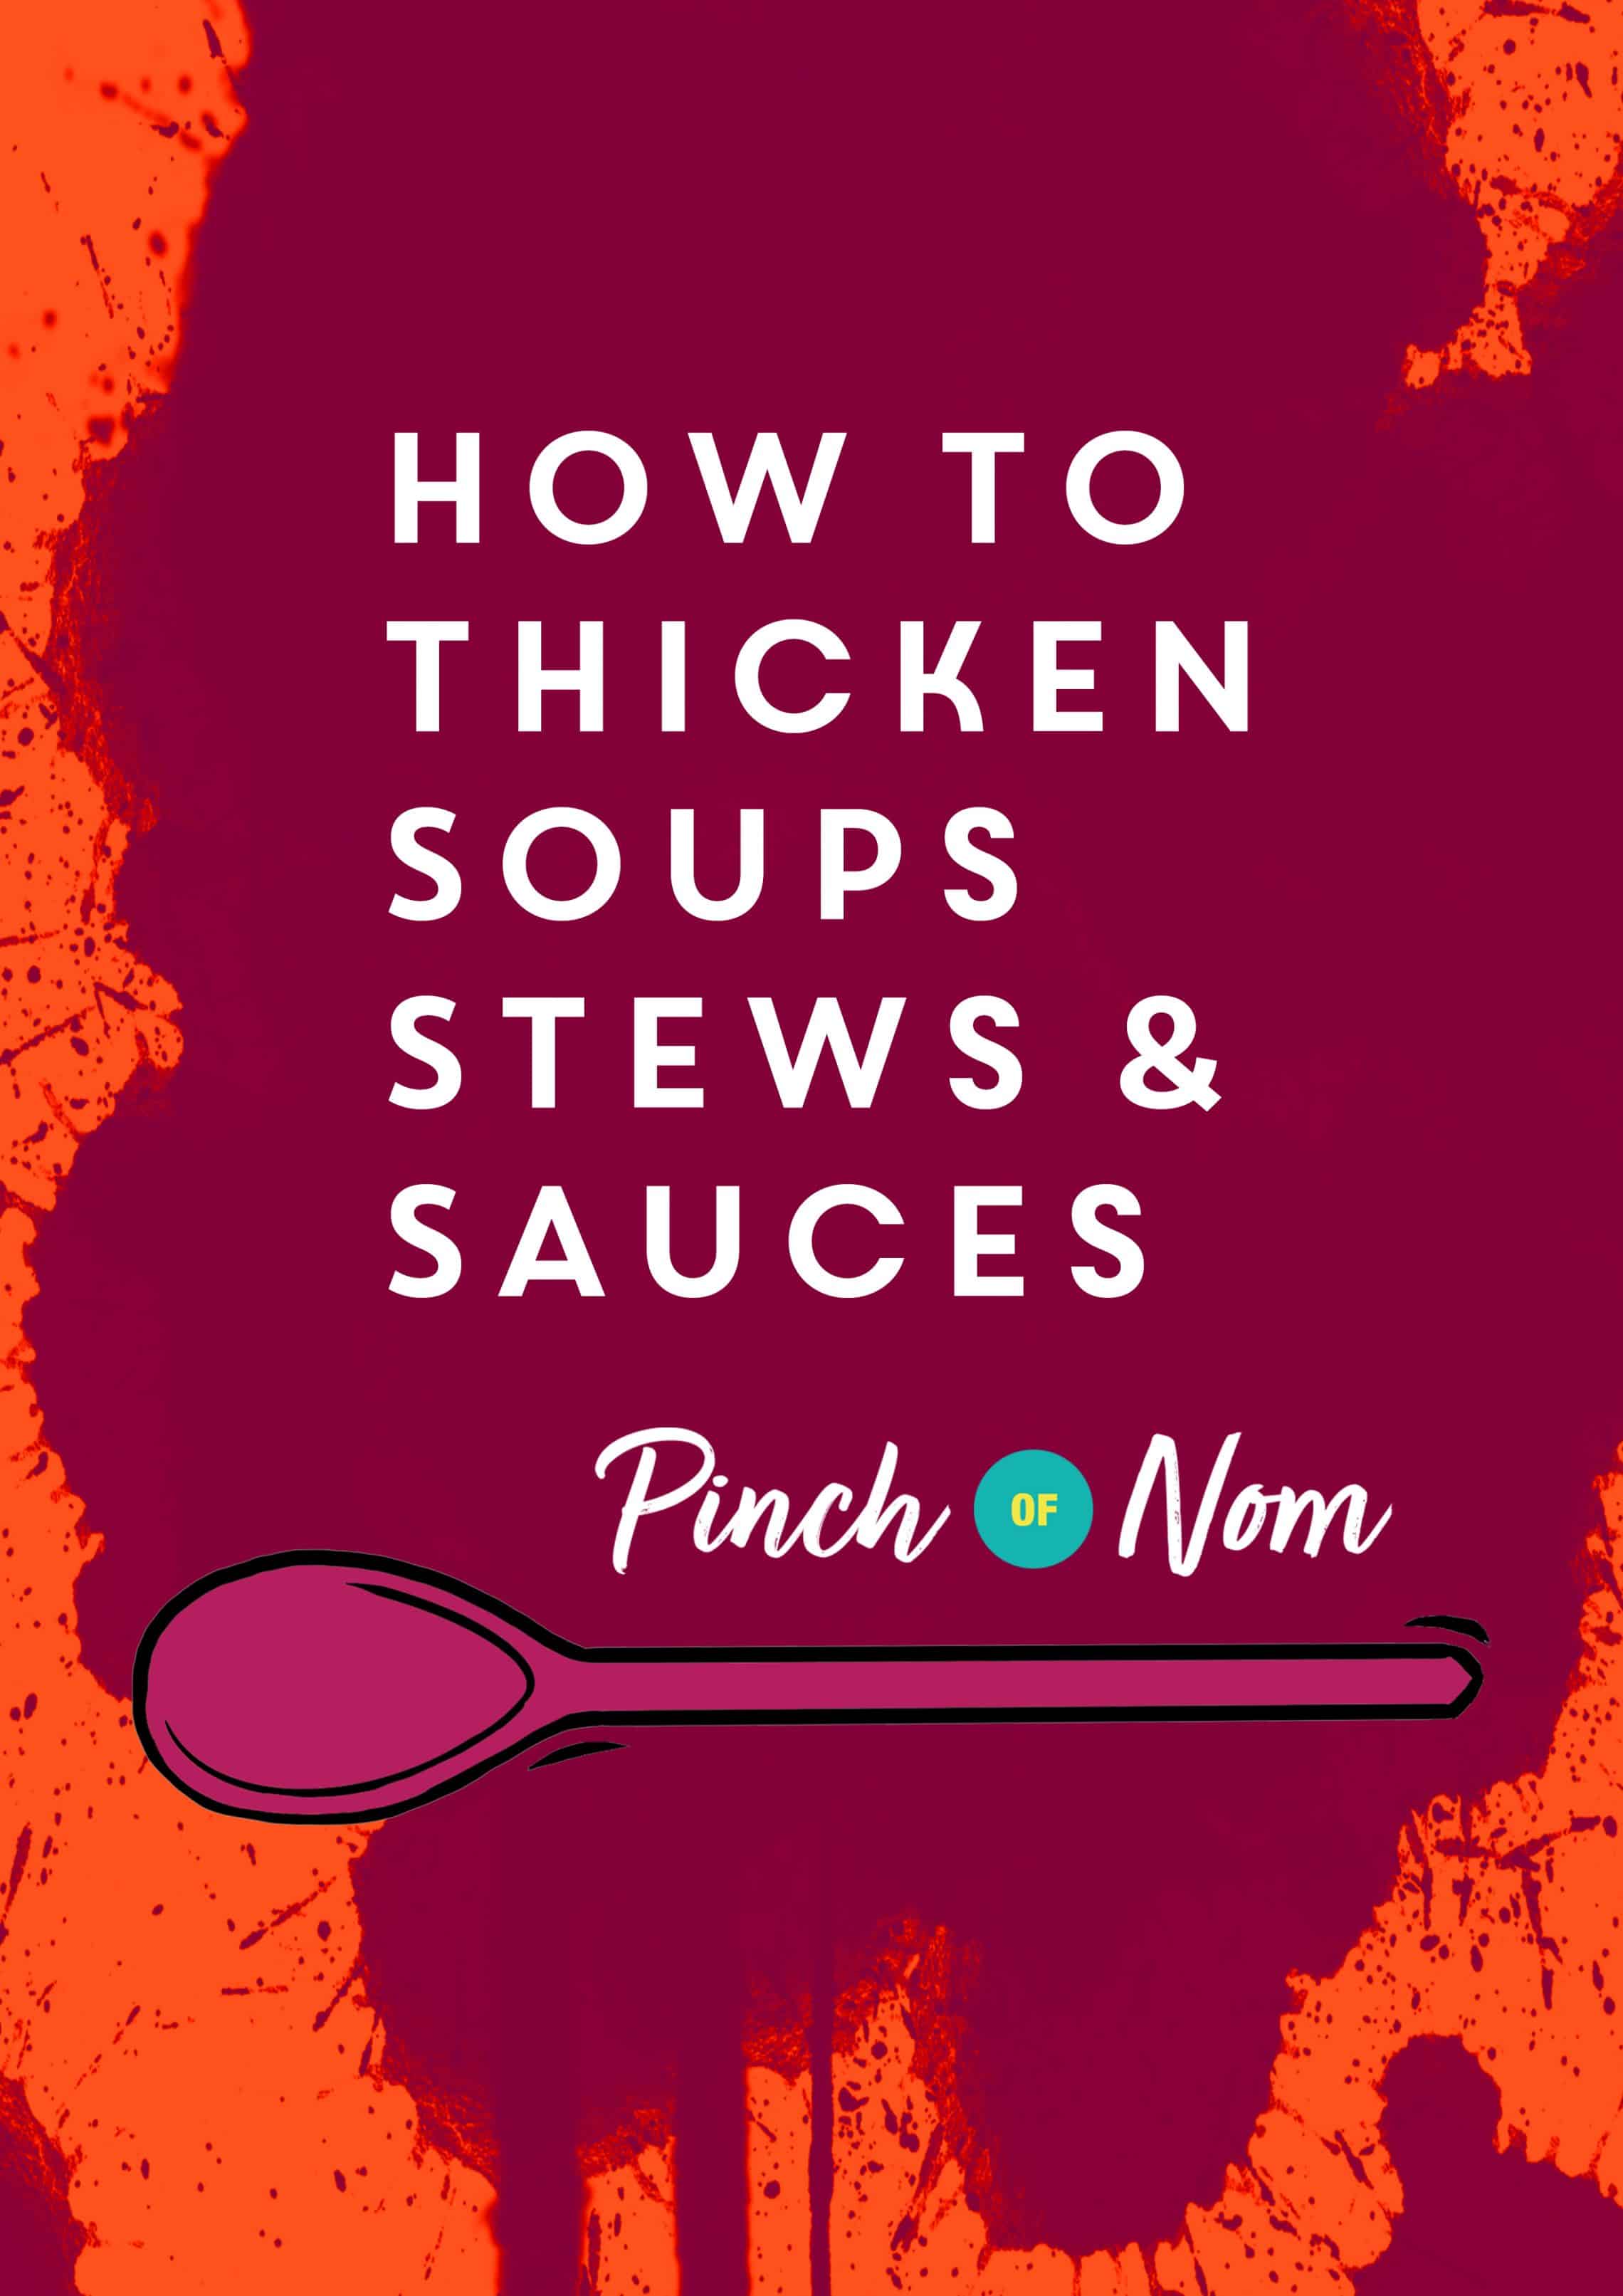 How to Thicken Soups, Stews and Sauces | Slimming & Weight Watchers Friendly